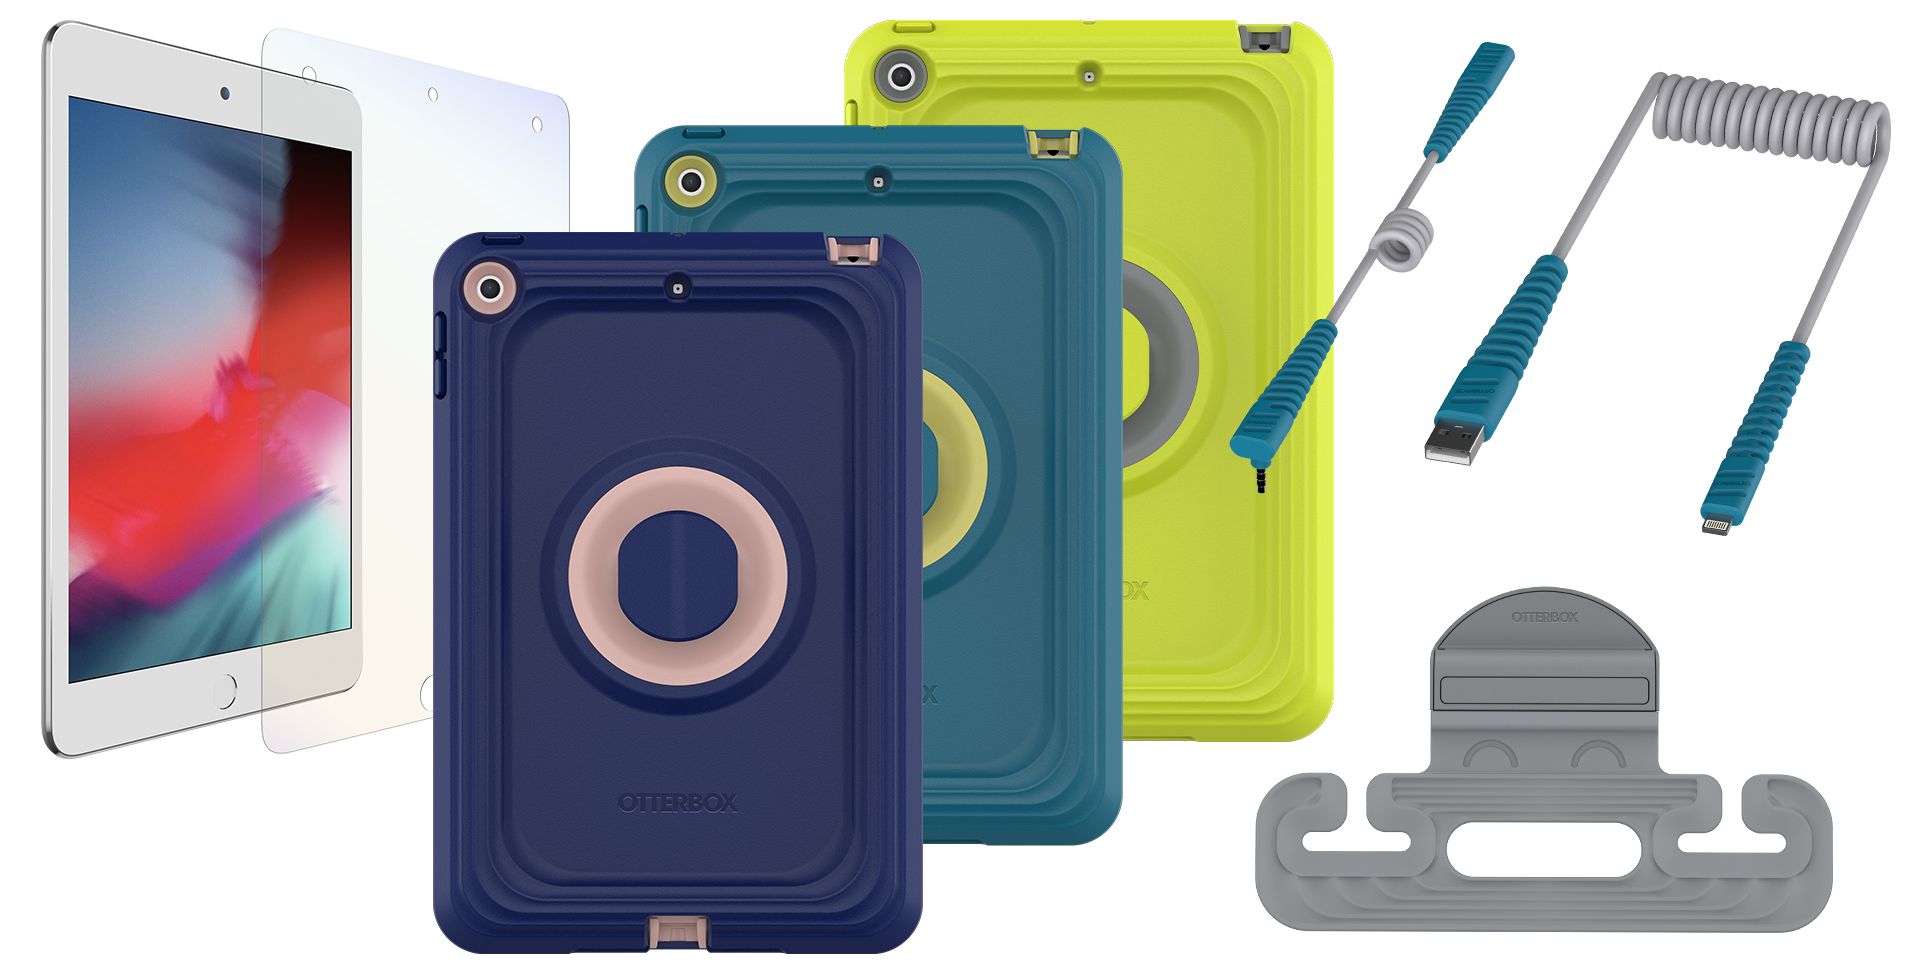 iPads Just Got Way More Kid-Friendly With OtterBox’s New Accessories